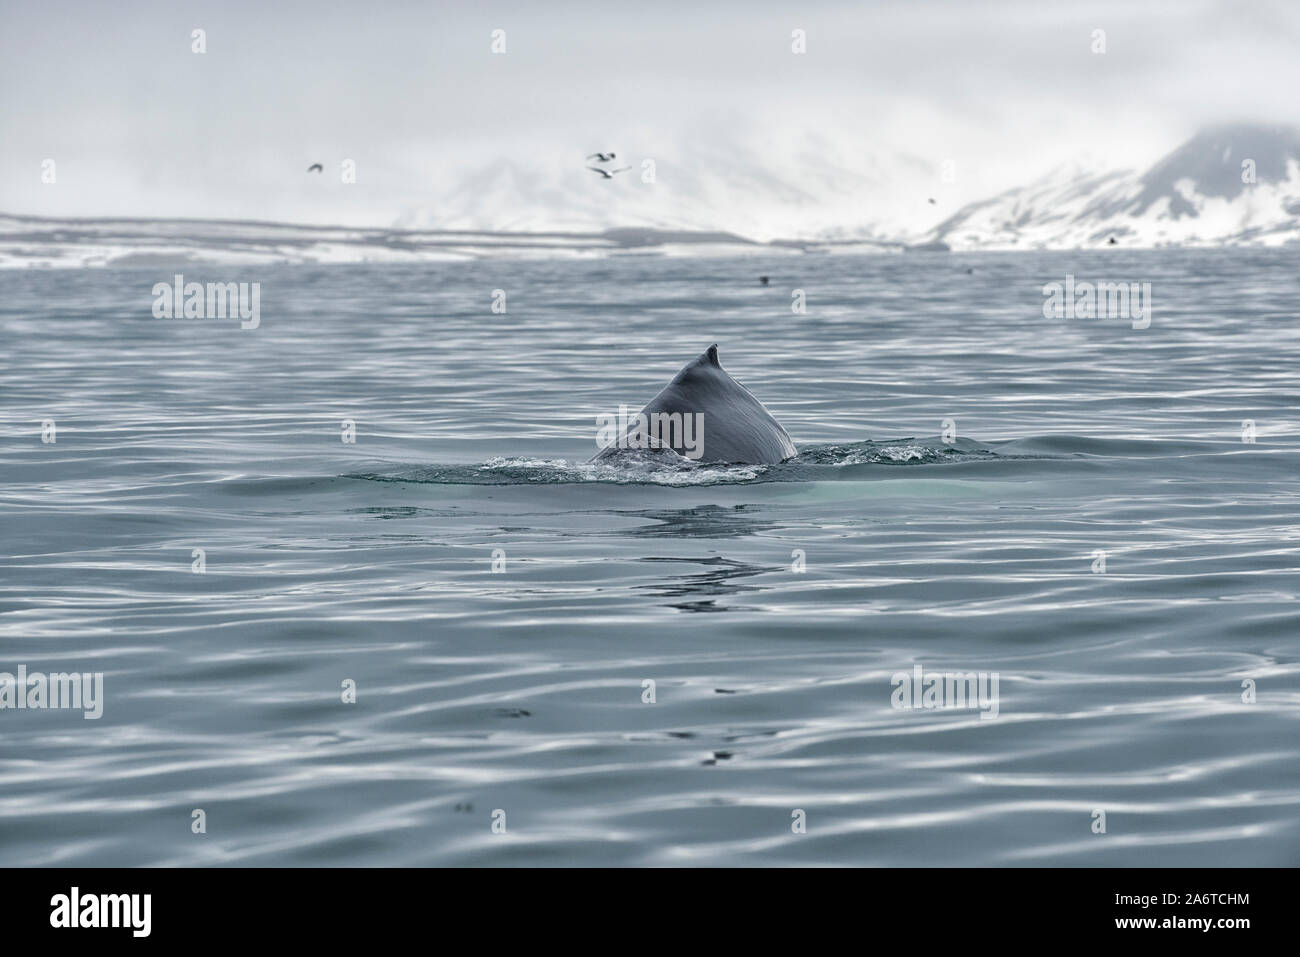 View of a blue whale (Balaenoptera musculus) near the coast of Spitsbergen, Svalbard, Norway Stock Photo